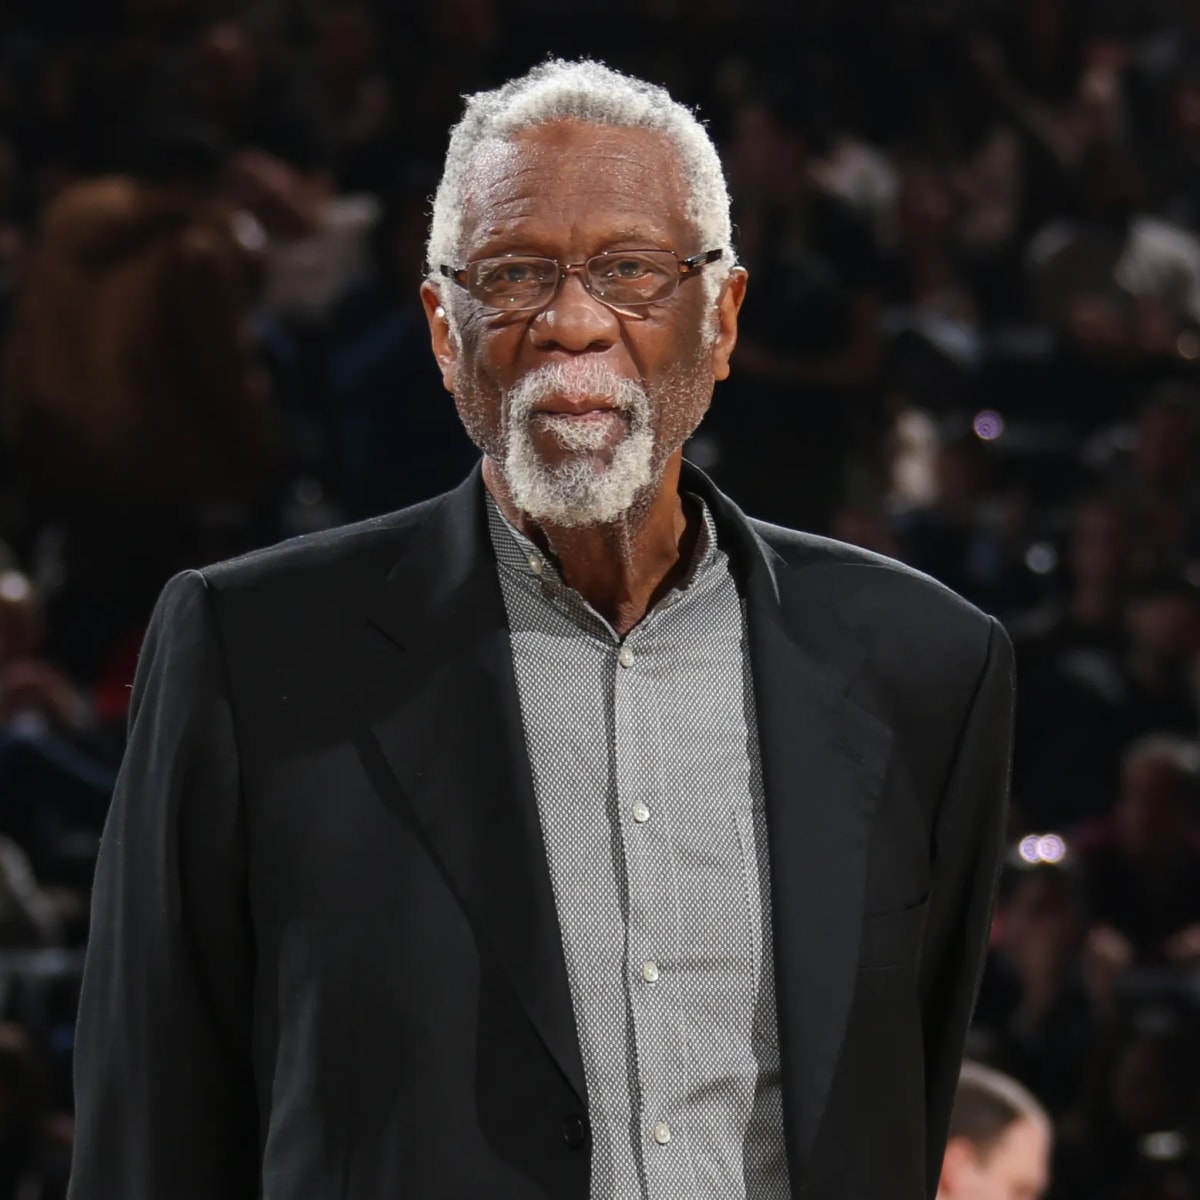 Bill Russell, 'genius' on the basketball court and civil rights